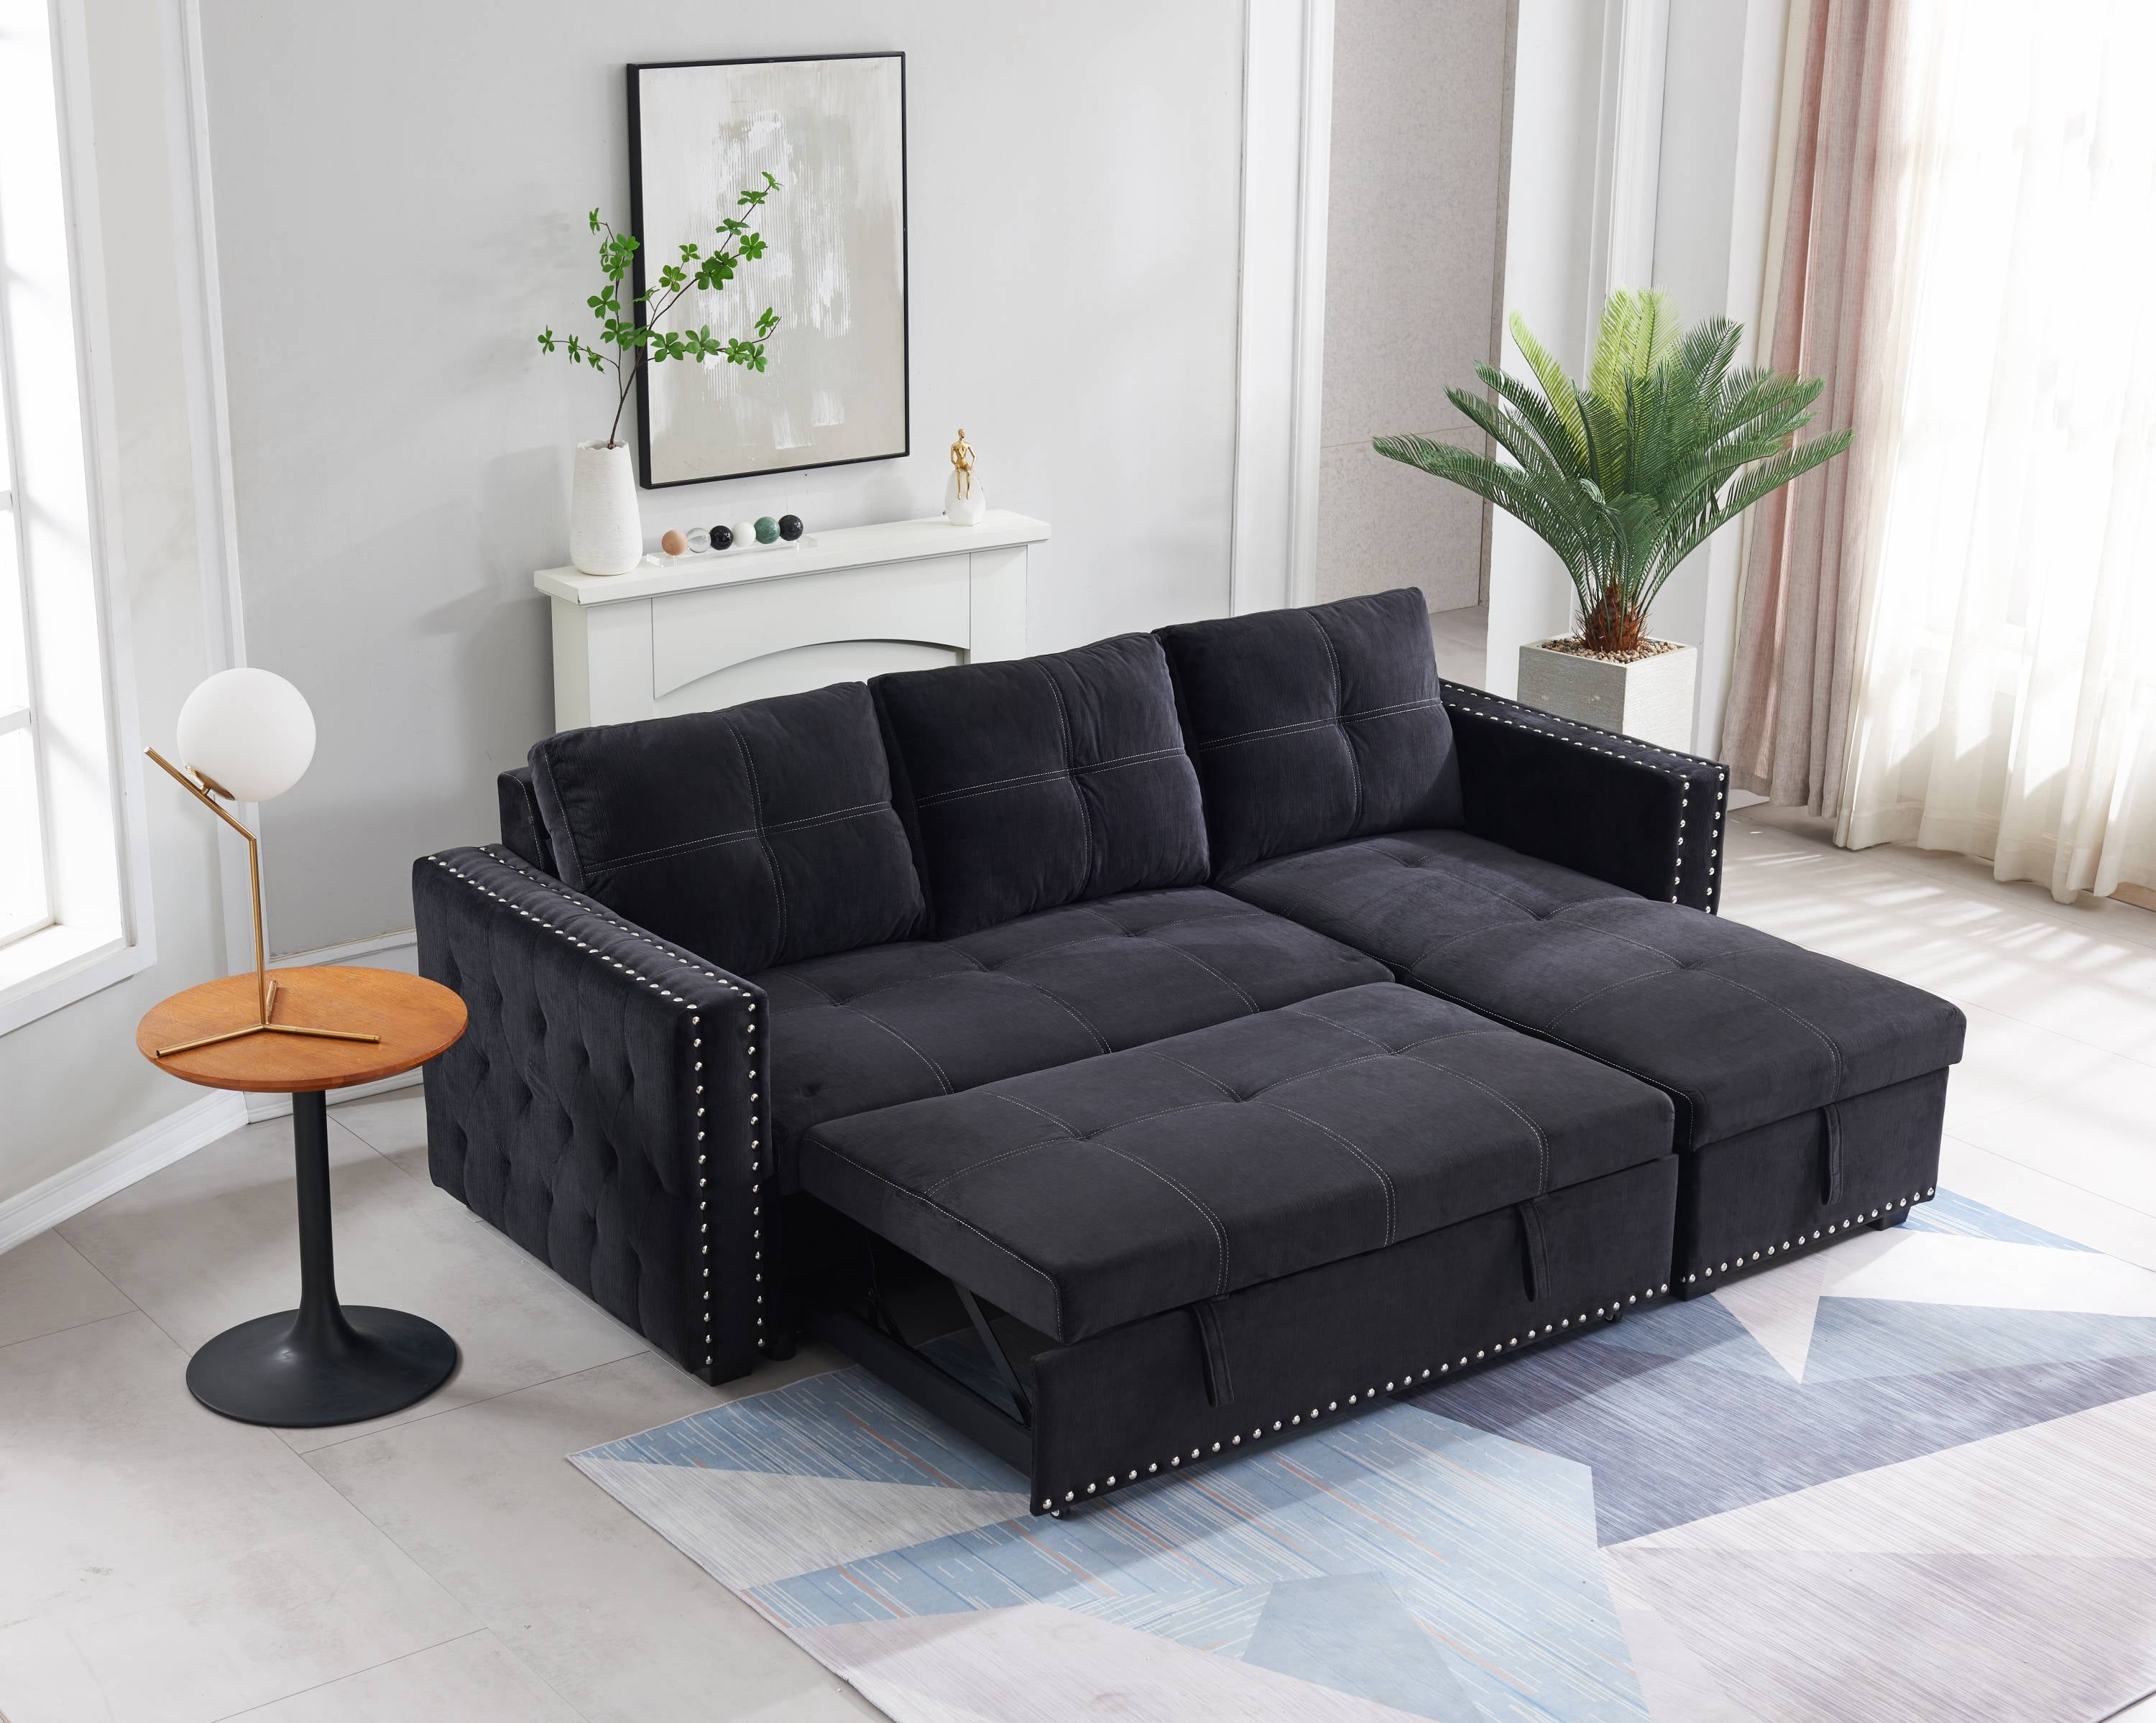 Reversible Sectional Sleeper Sofa, Pull Out Sleeper Sofa Bed